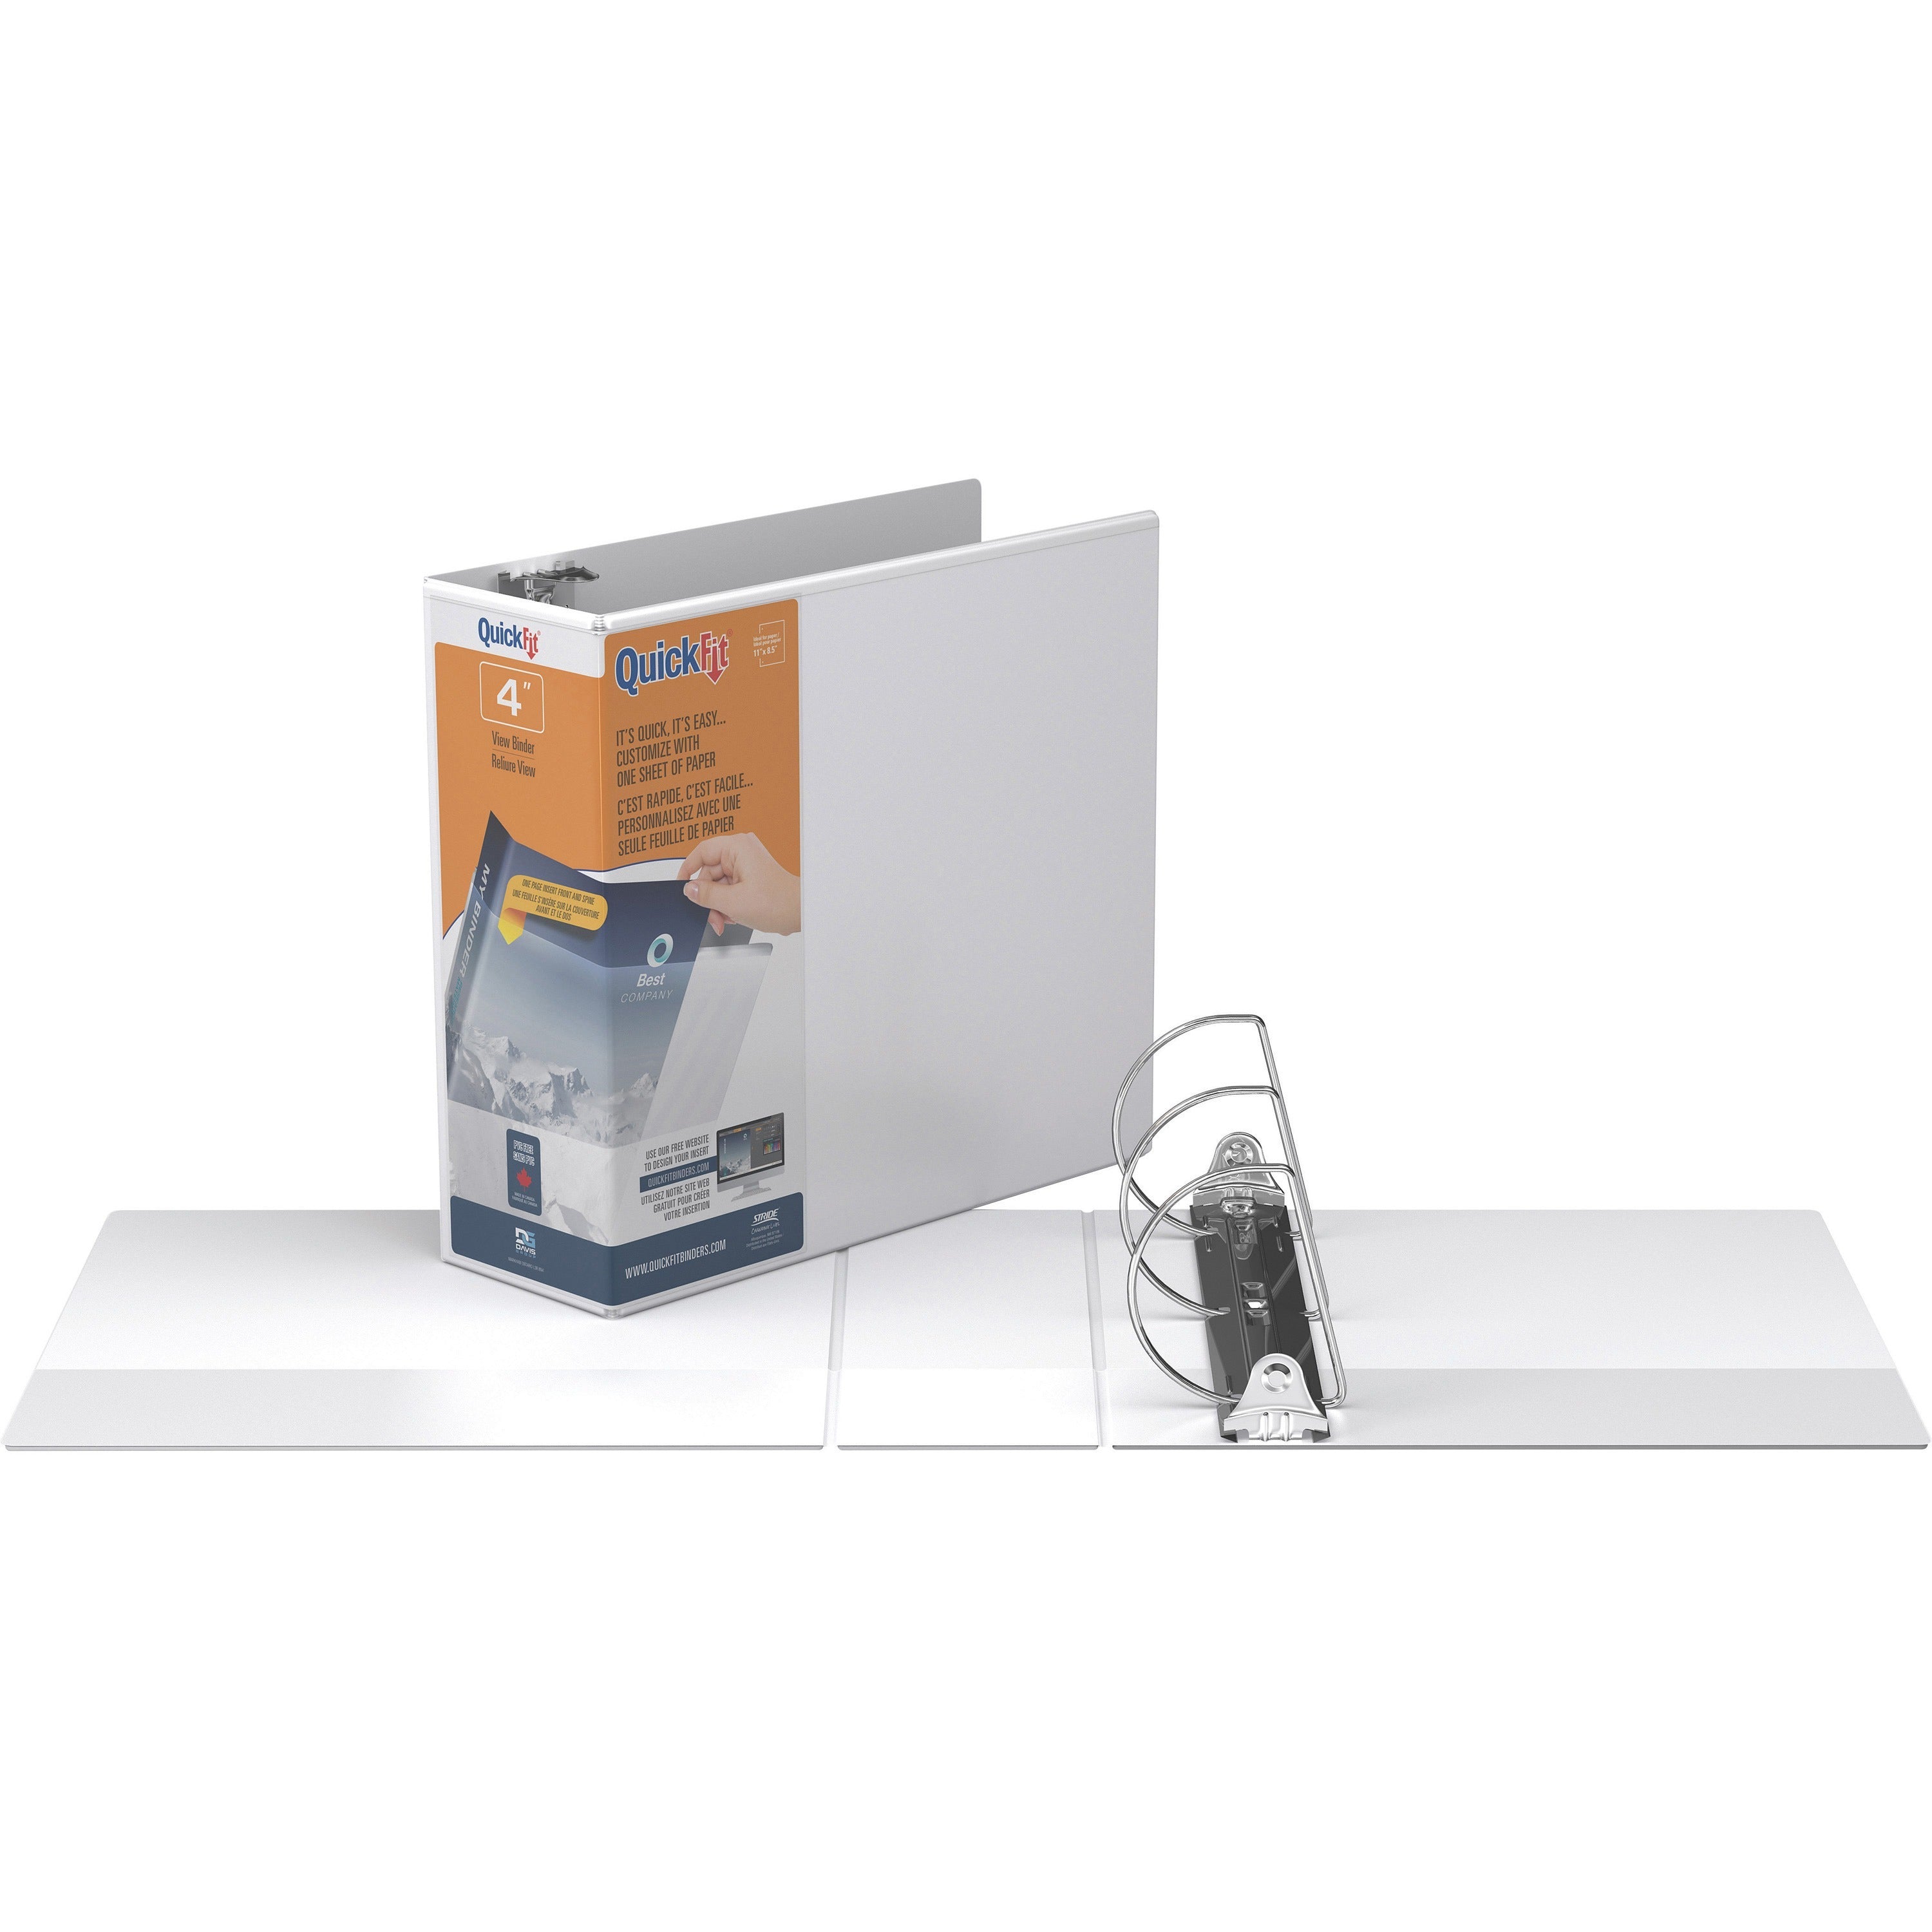 quickfit-d-ring-view-binders-4-binder-capacity-letter-8-1-2-x-11-sheet-size-4-ring-d-ring-fasteners-2-internal-pockets-vinyl-steel-white-recycled-print-transfer-resistant-pvc-free-exposed-rivet-1-each_stw870600 - 1